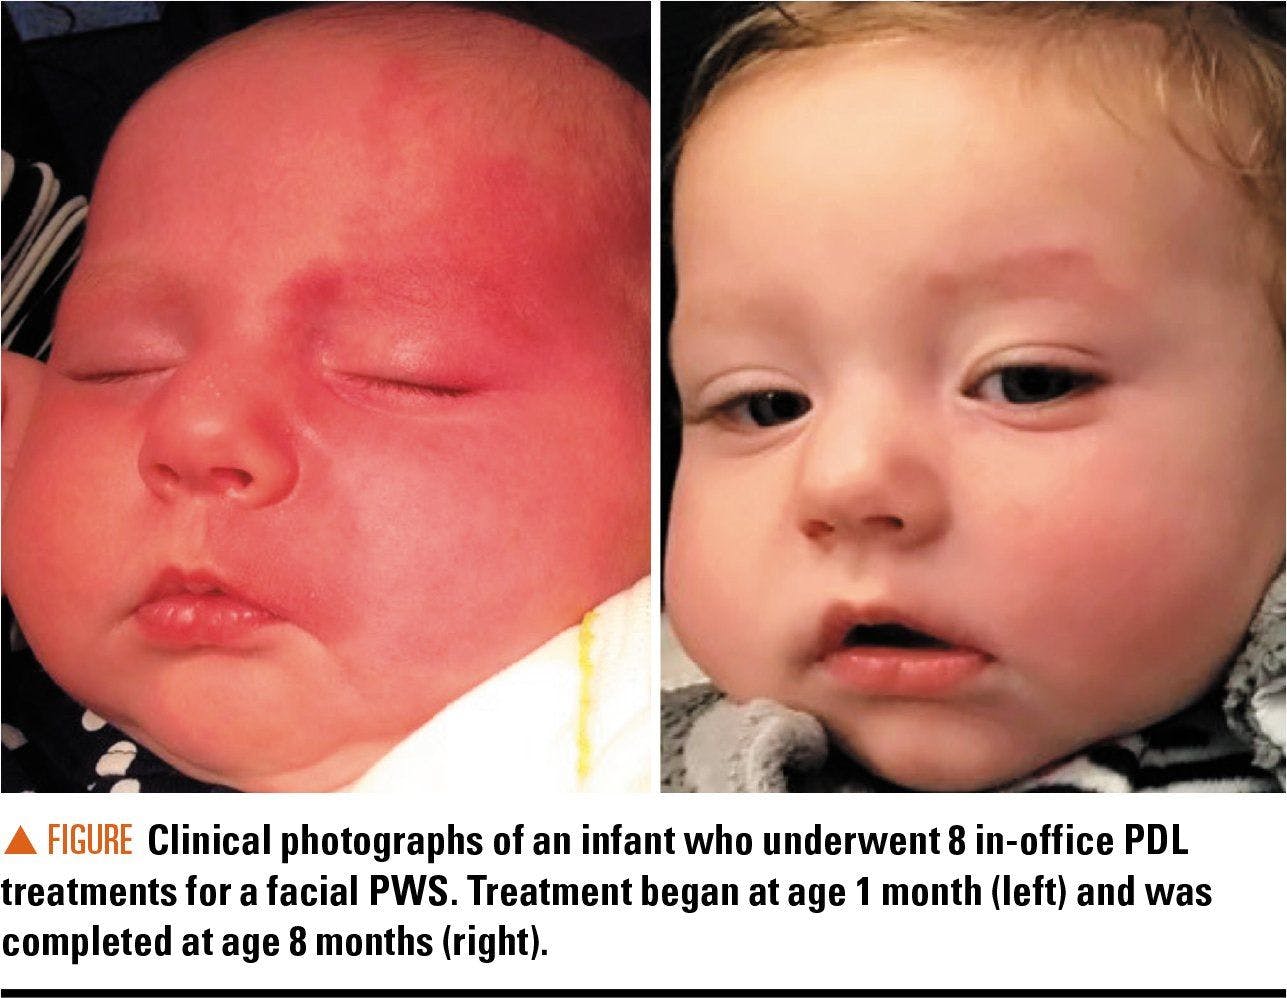 Baby with PWS and after treatment